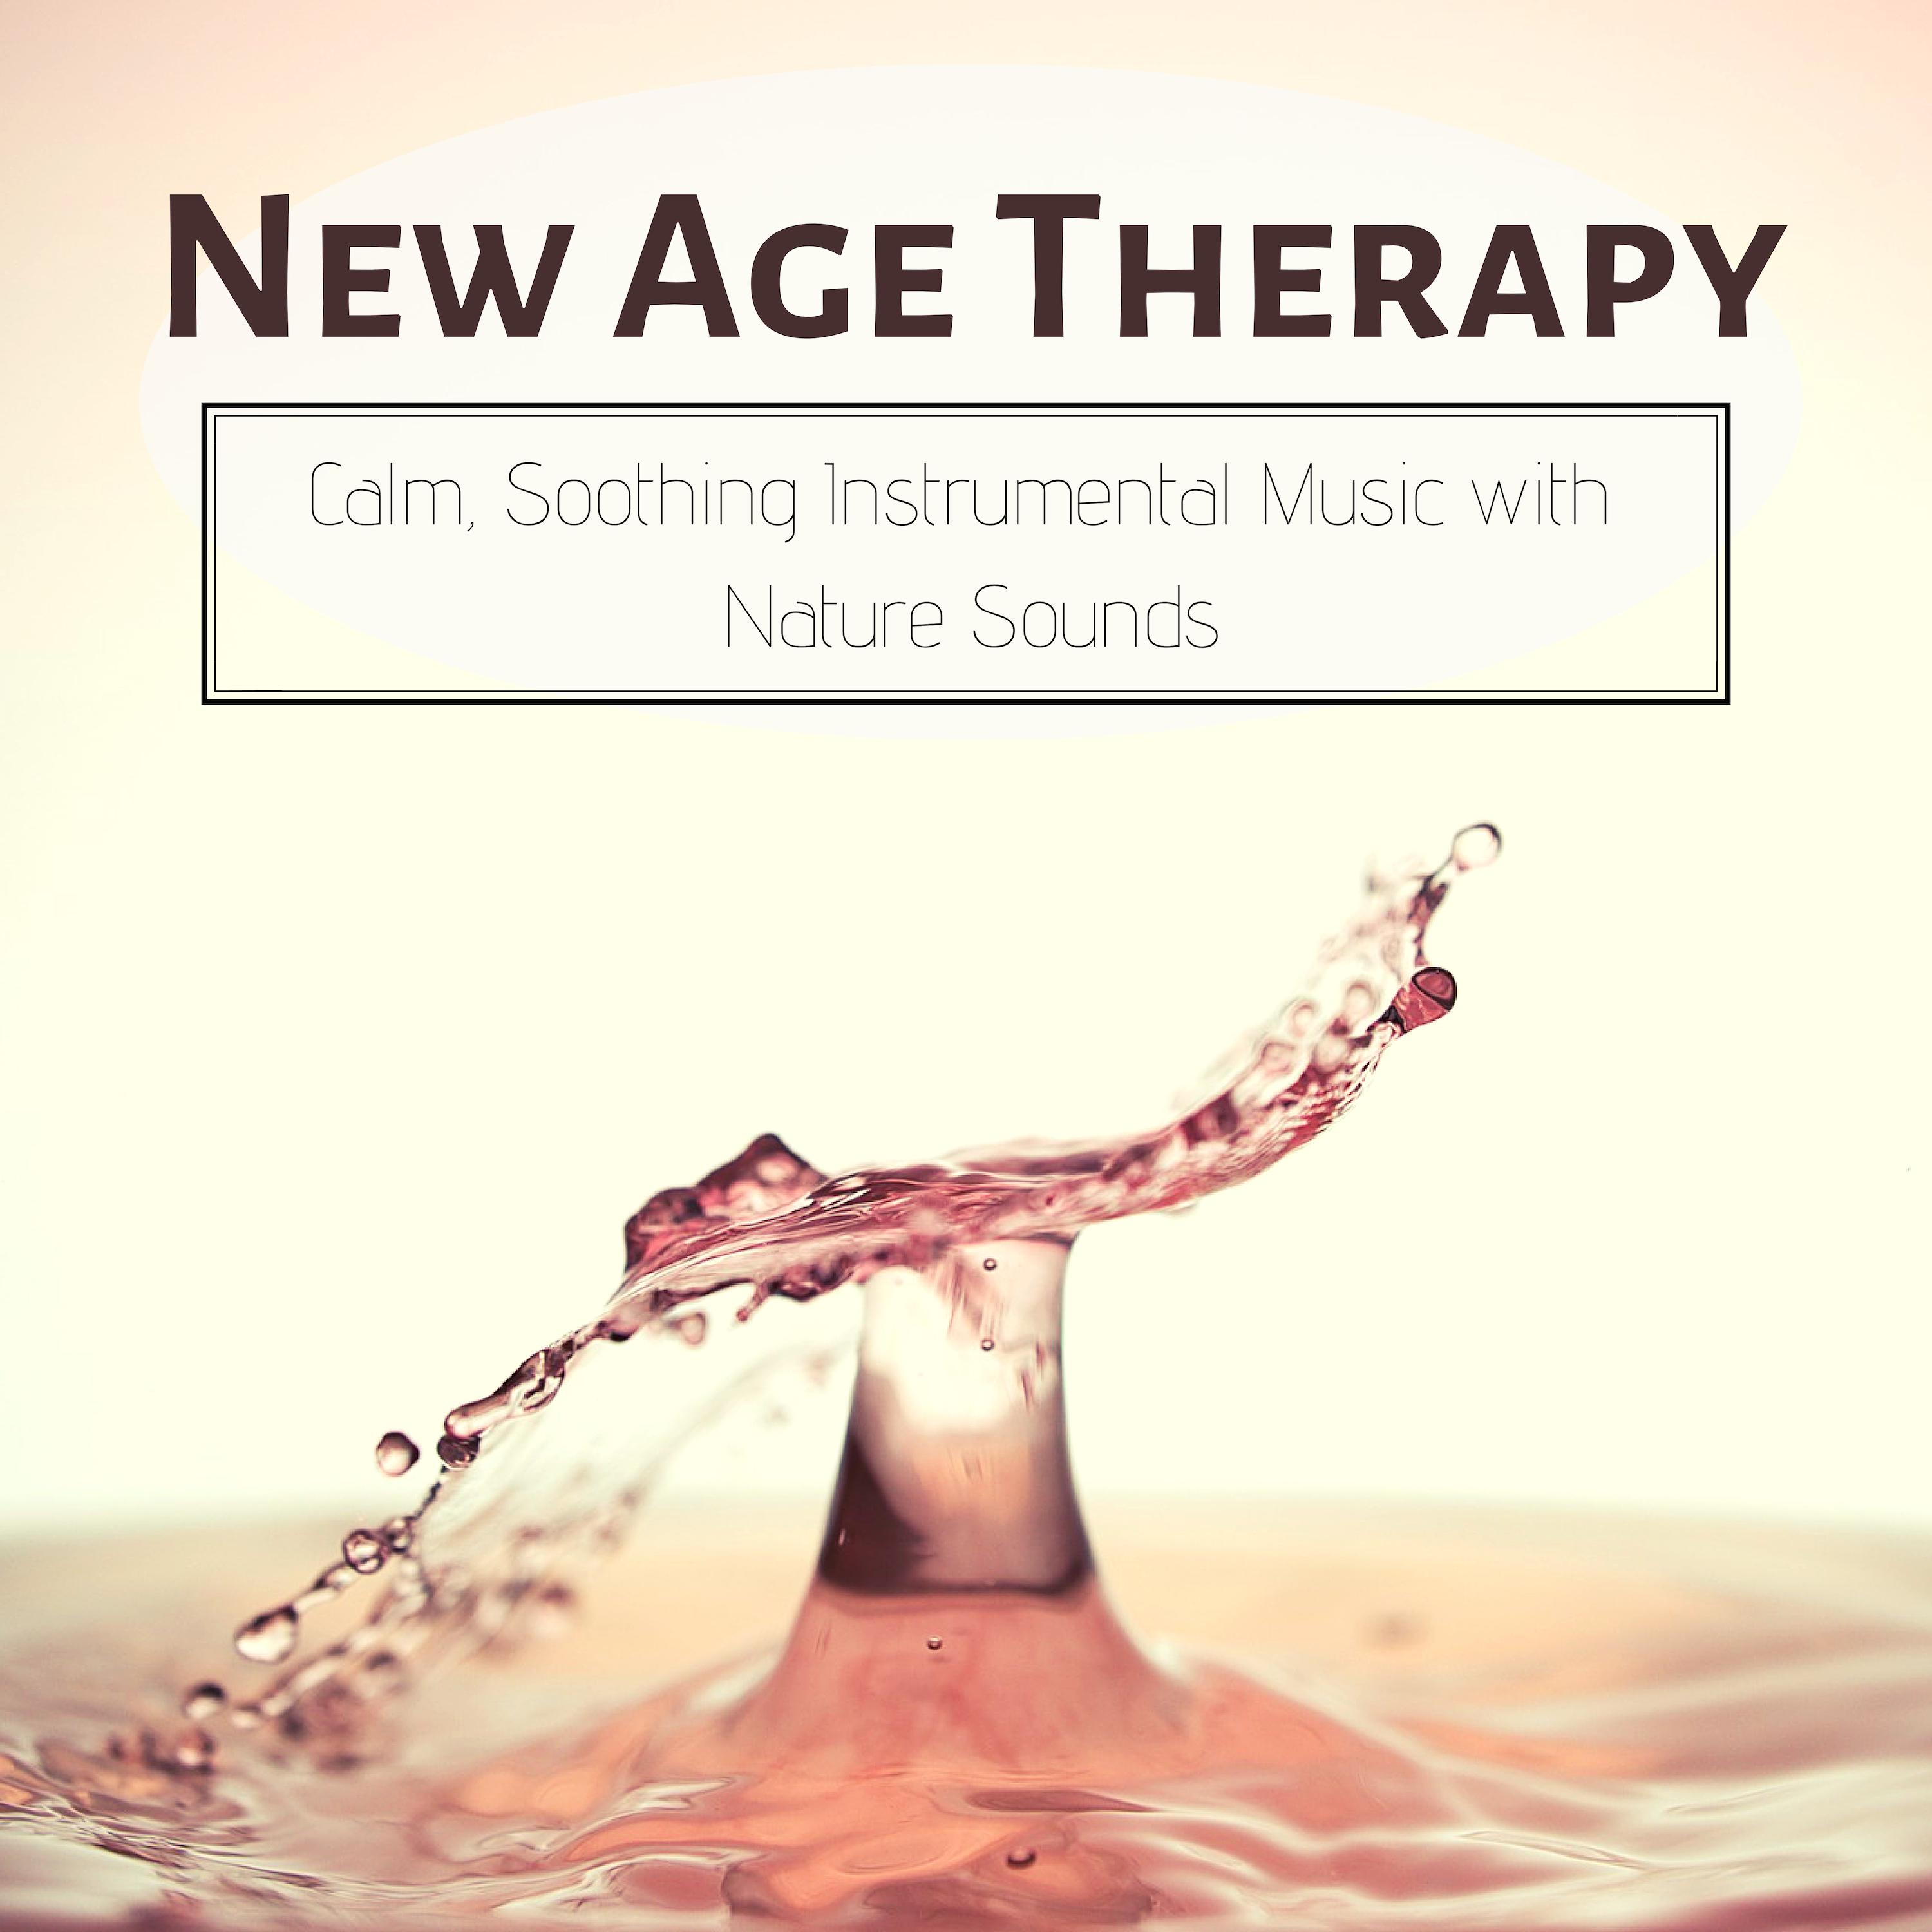 New Age Therapy: Calm, Soothing Instrumental Music with Nature Sounds